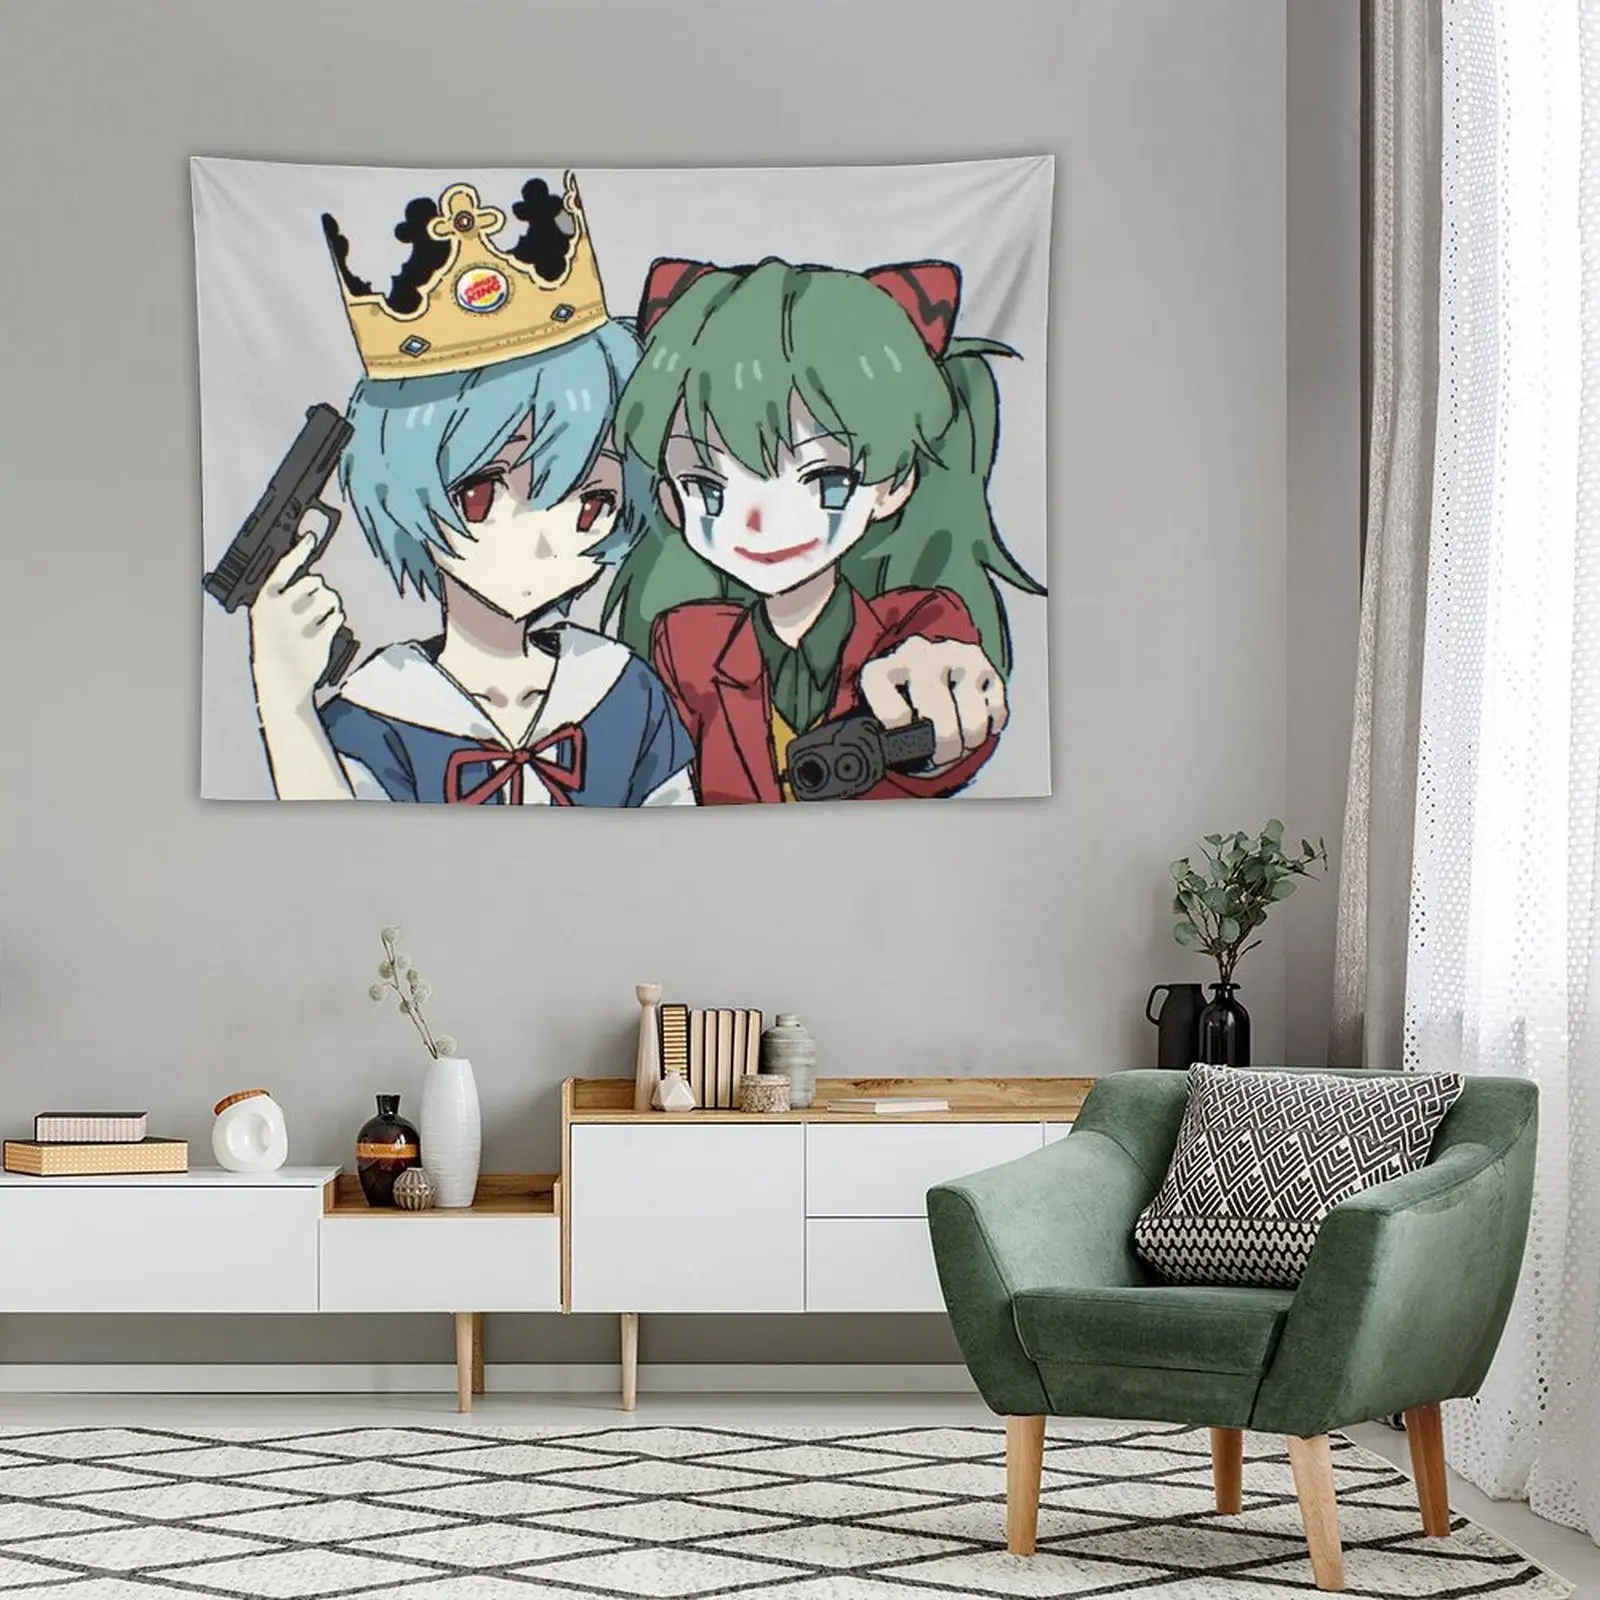 New Rei and Asuka Joker and Crown Tapestry Wall Hanging Decor Tapete For The Wall House Decor Carpet Wall